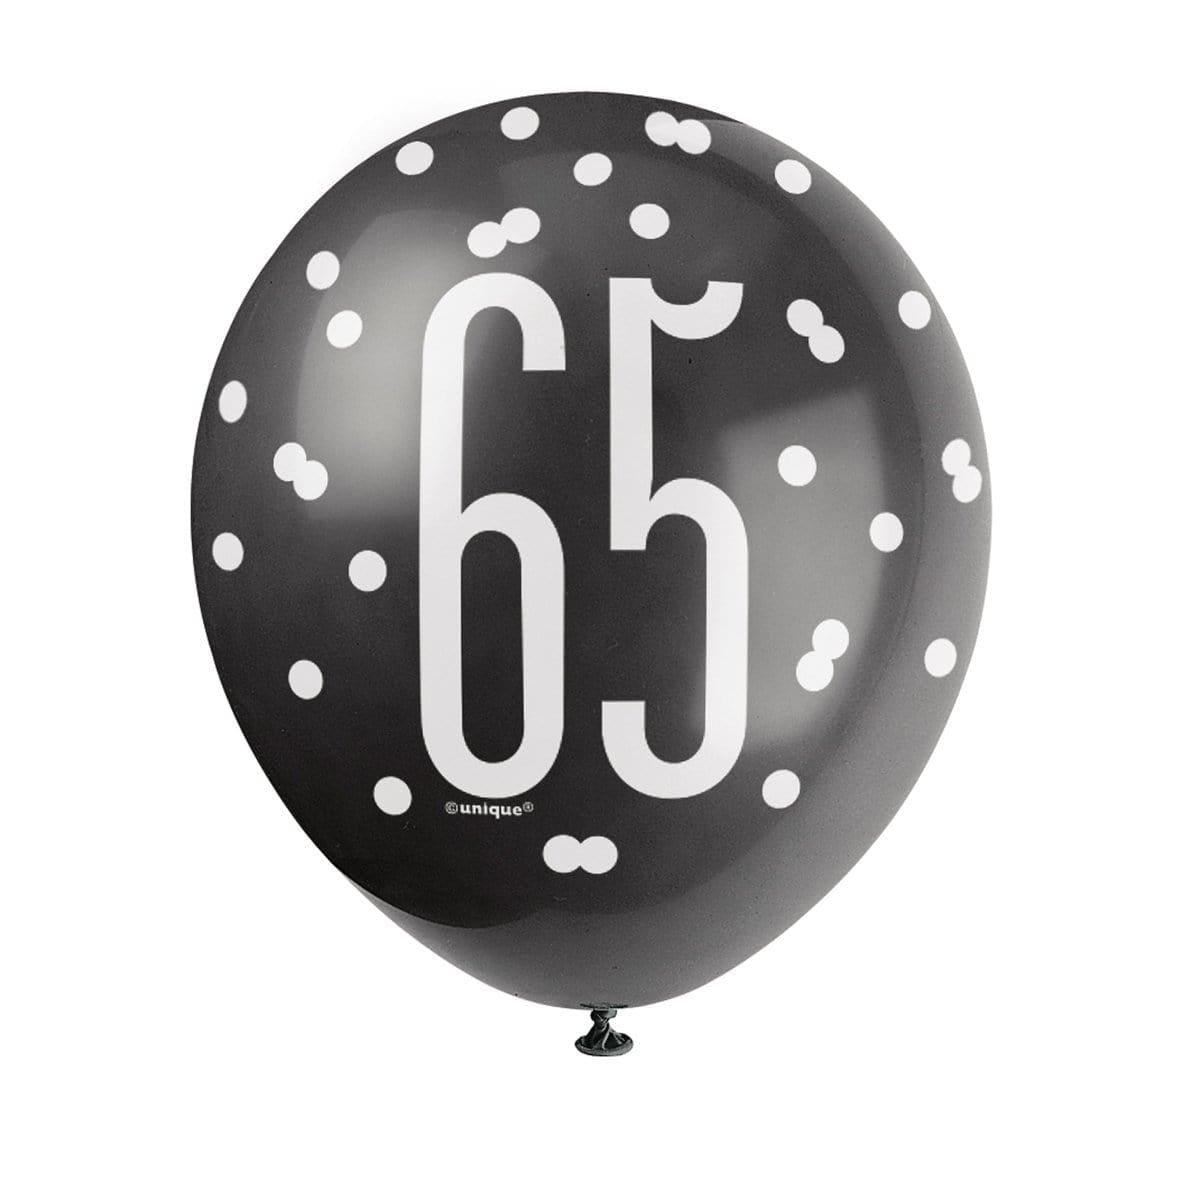 Buy Age Specific Birthday Bonne Fête Black/Silver - Latex Balloon 6/pkg - 65 sold at Party Expert